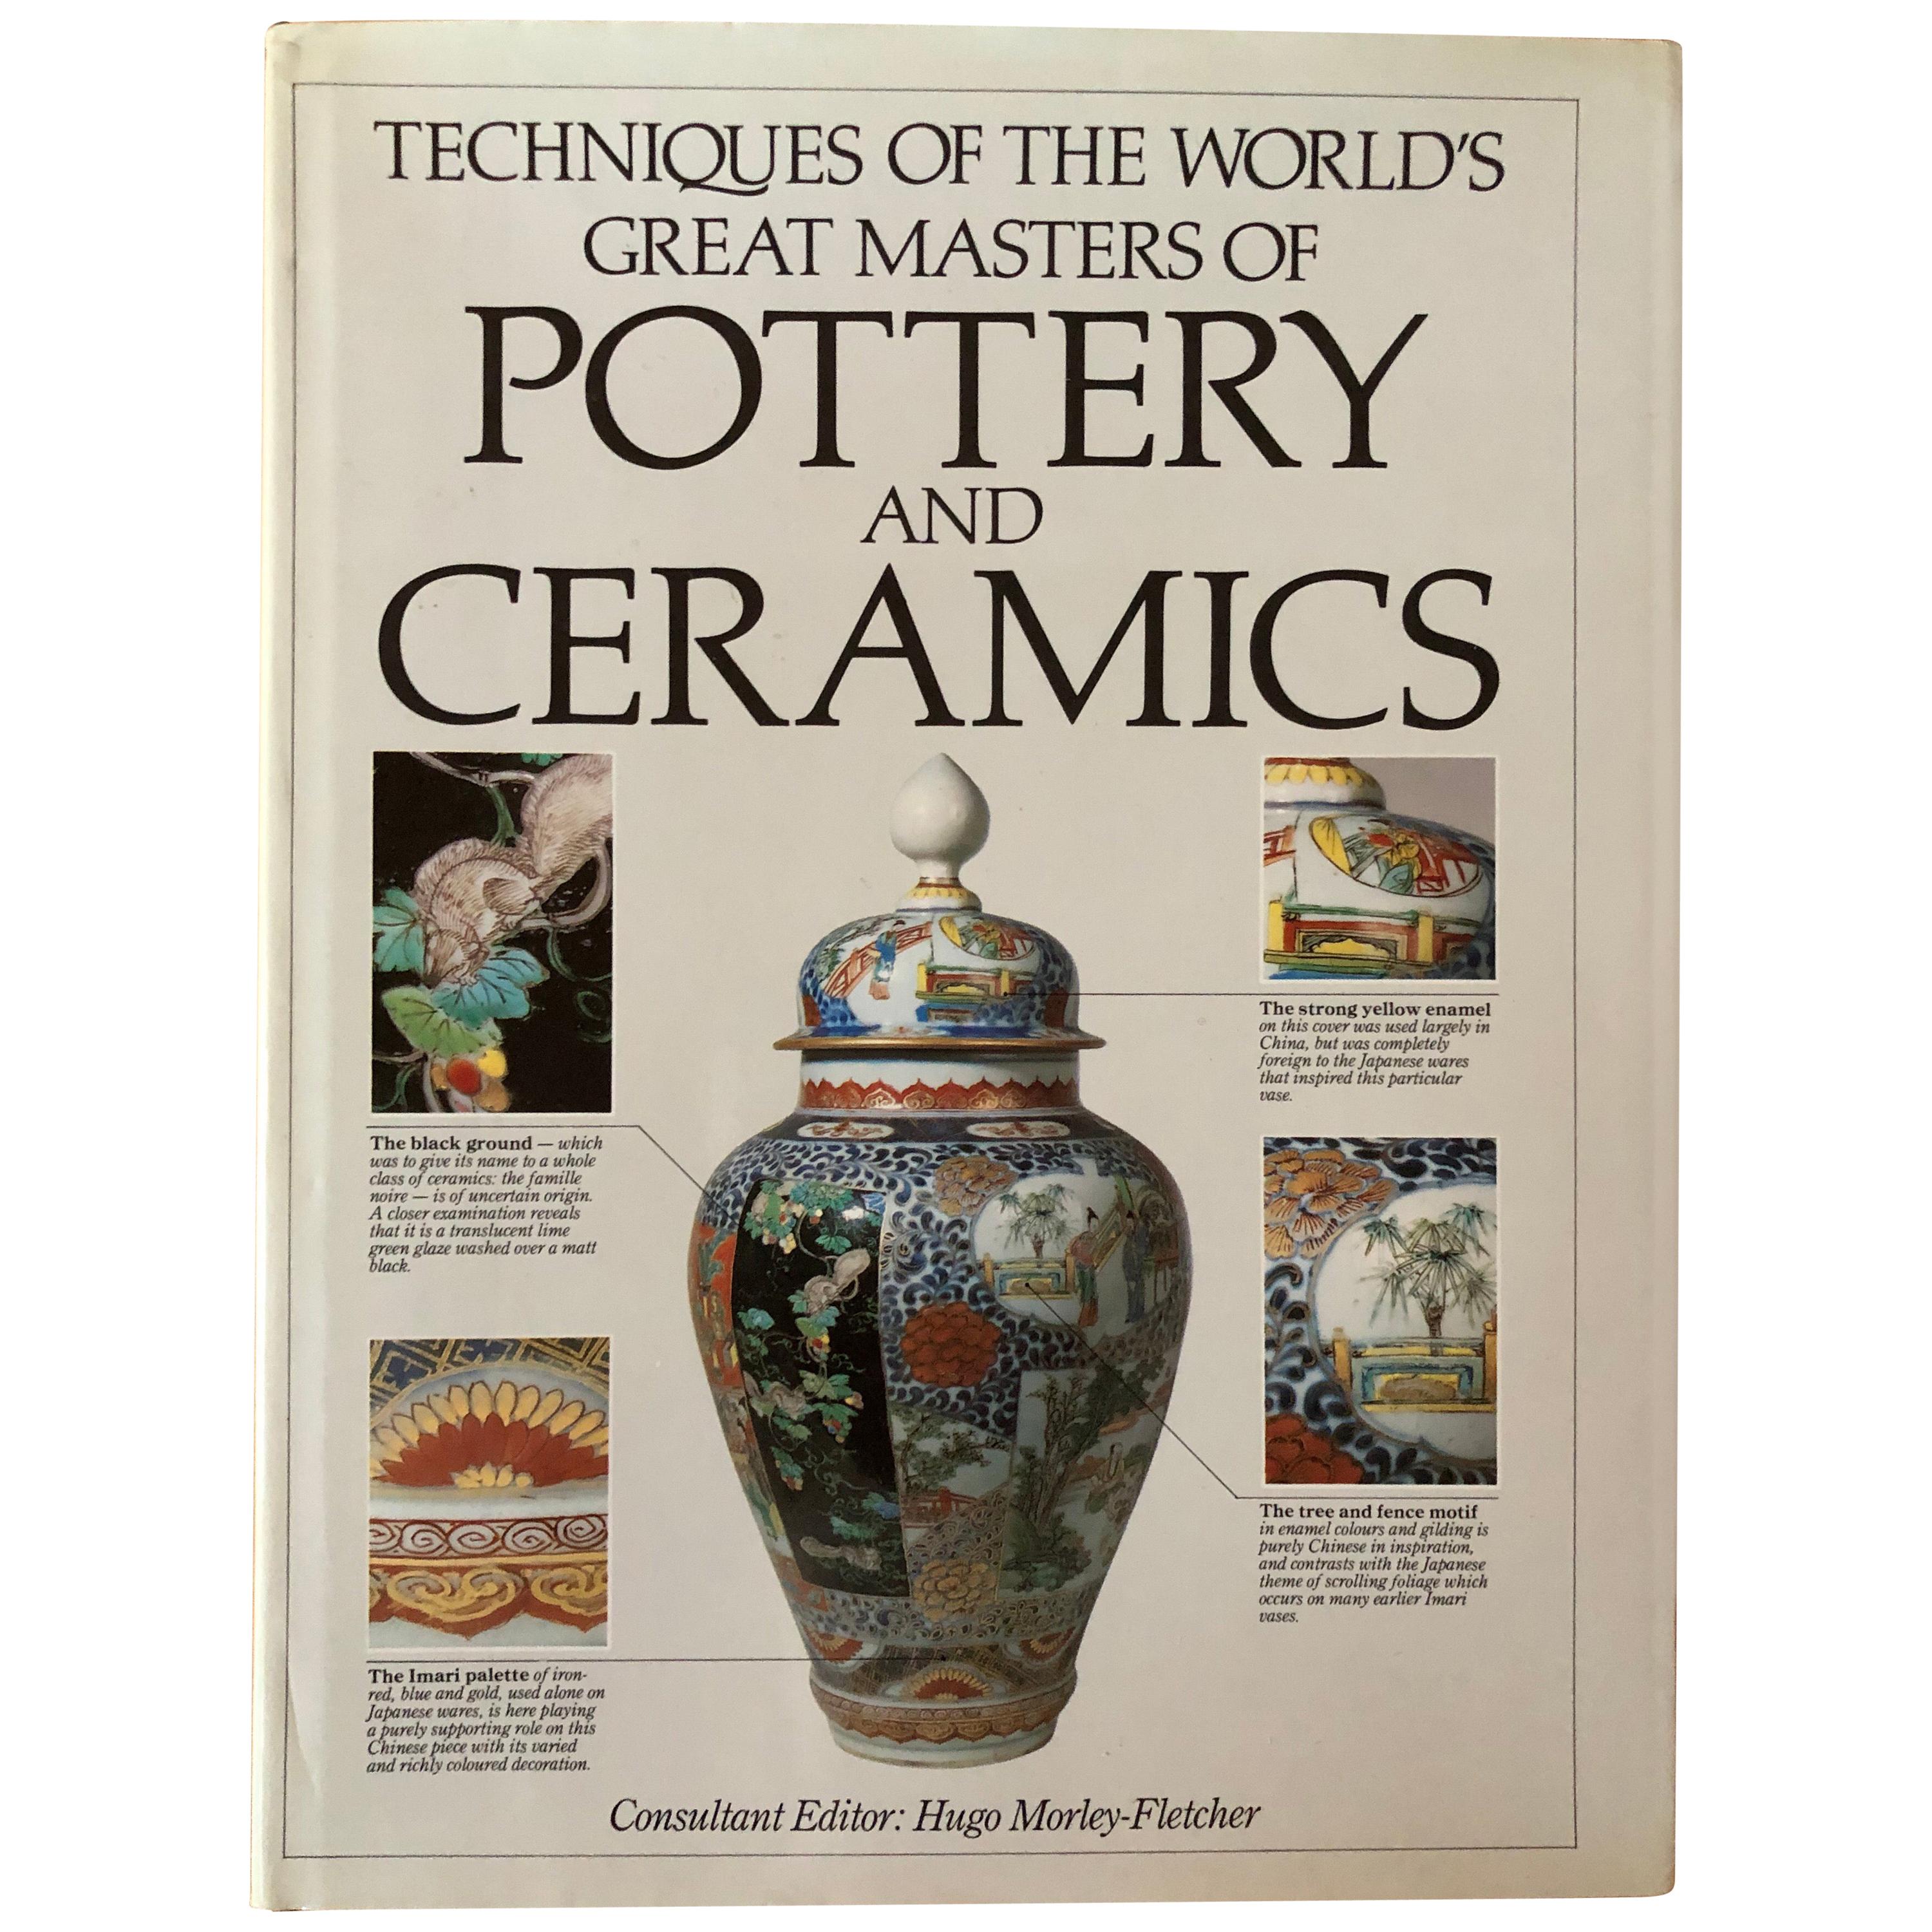 Techniques of the World's Great Masters of Pottery and Ceramics, Oxford